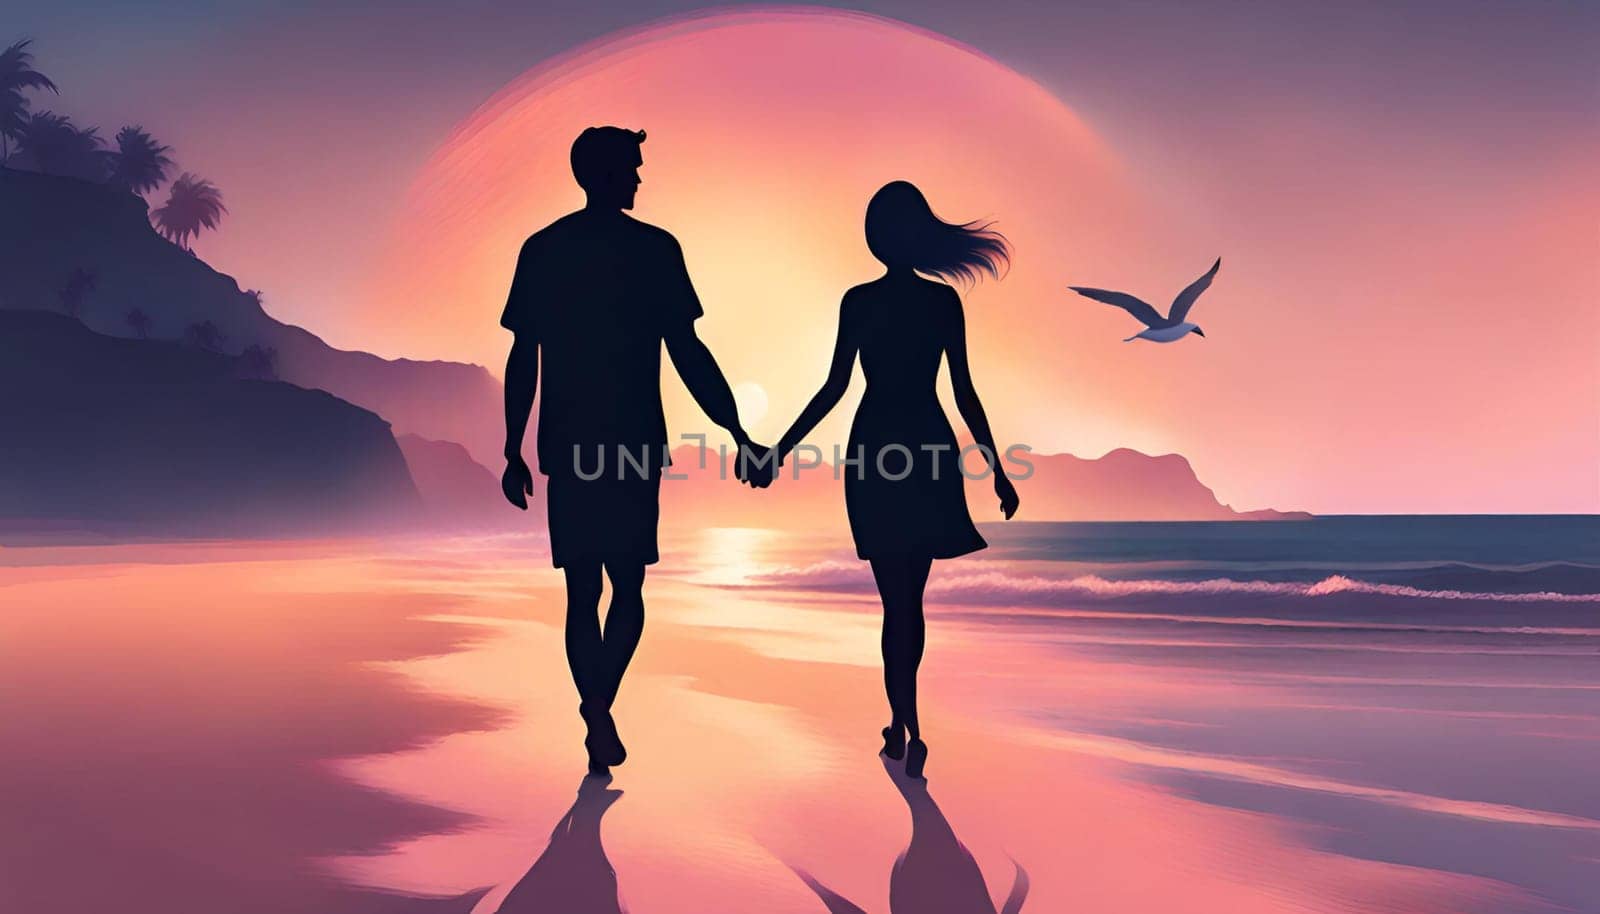 A couple on a beach at sunset. Happy Valentine's Day